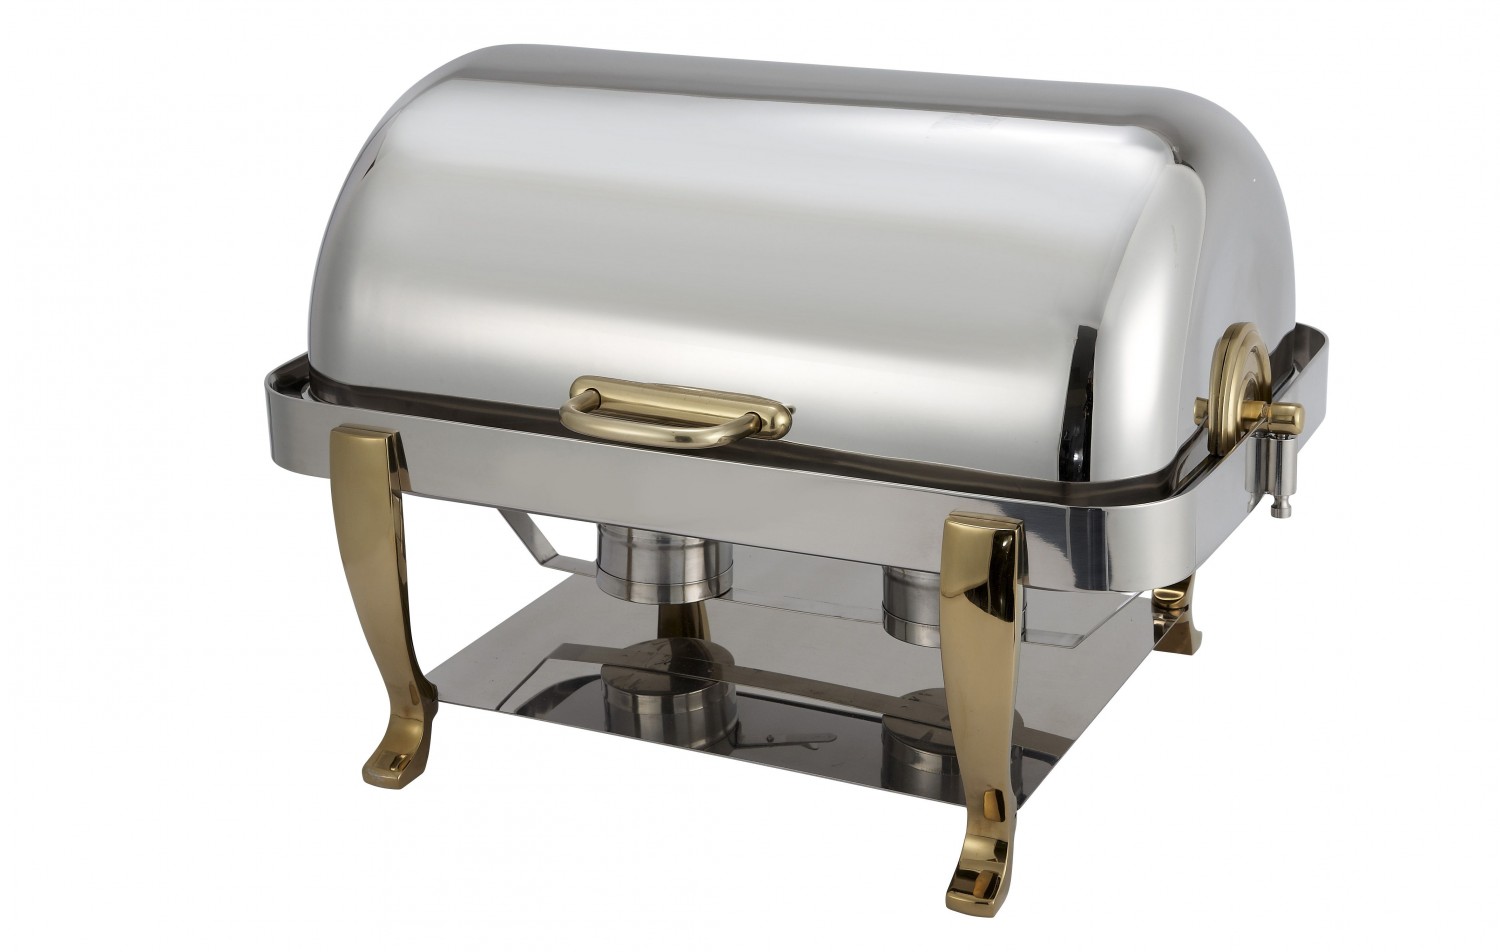 8 QT FULL SIZE BUFFET CHAFER
SET VINTAGE STAINLESS STEEL
INC FOOD PAN, WATER PAN, FUEL
HOLDERS